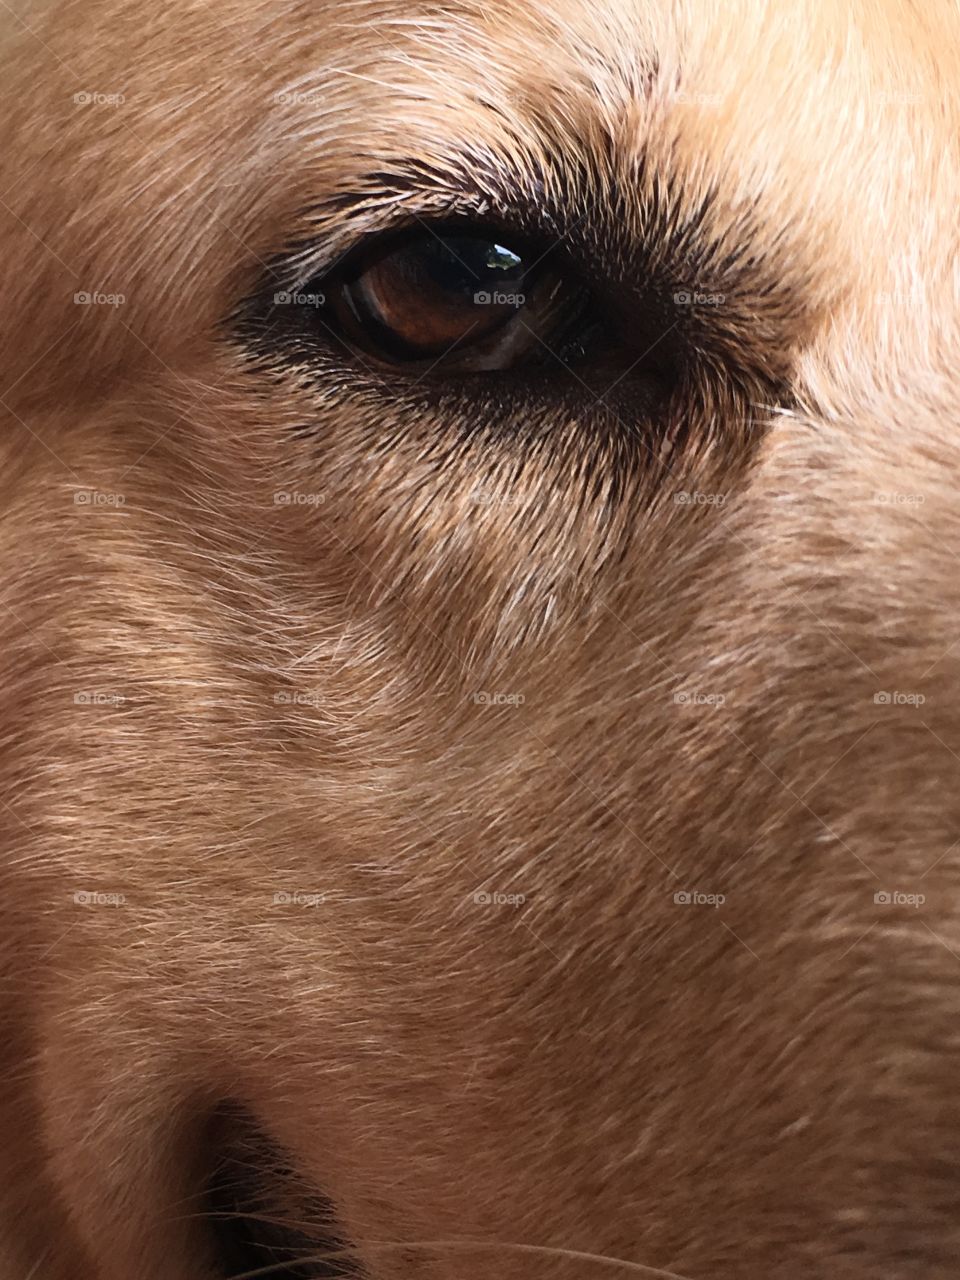 Beautiful eyes from a cute dog